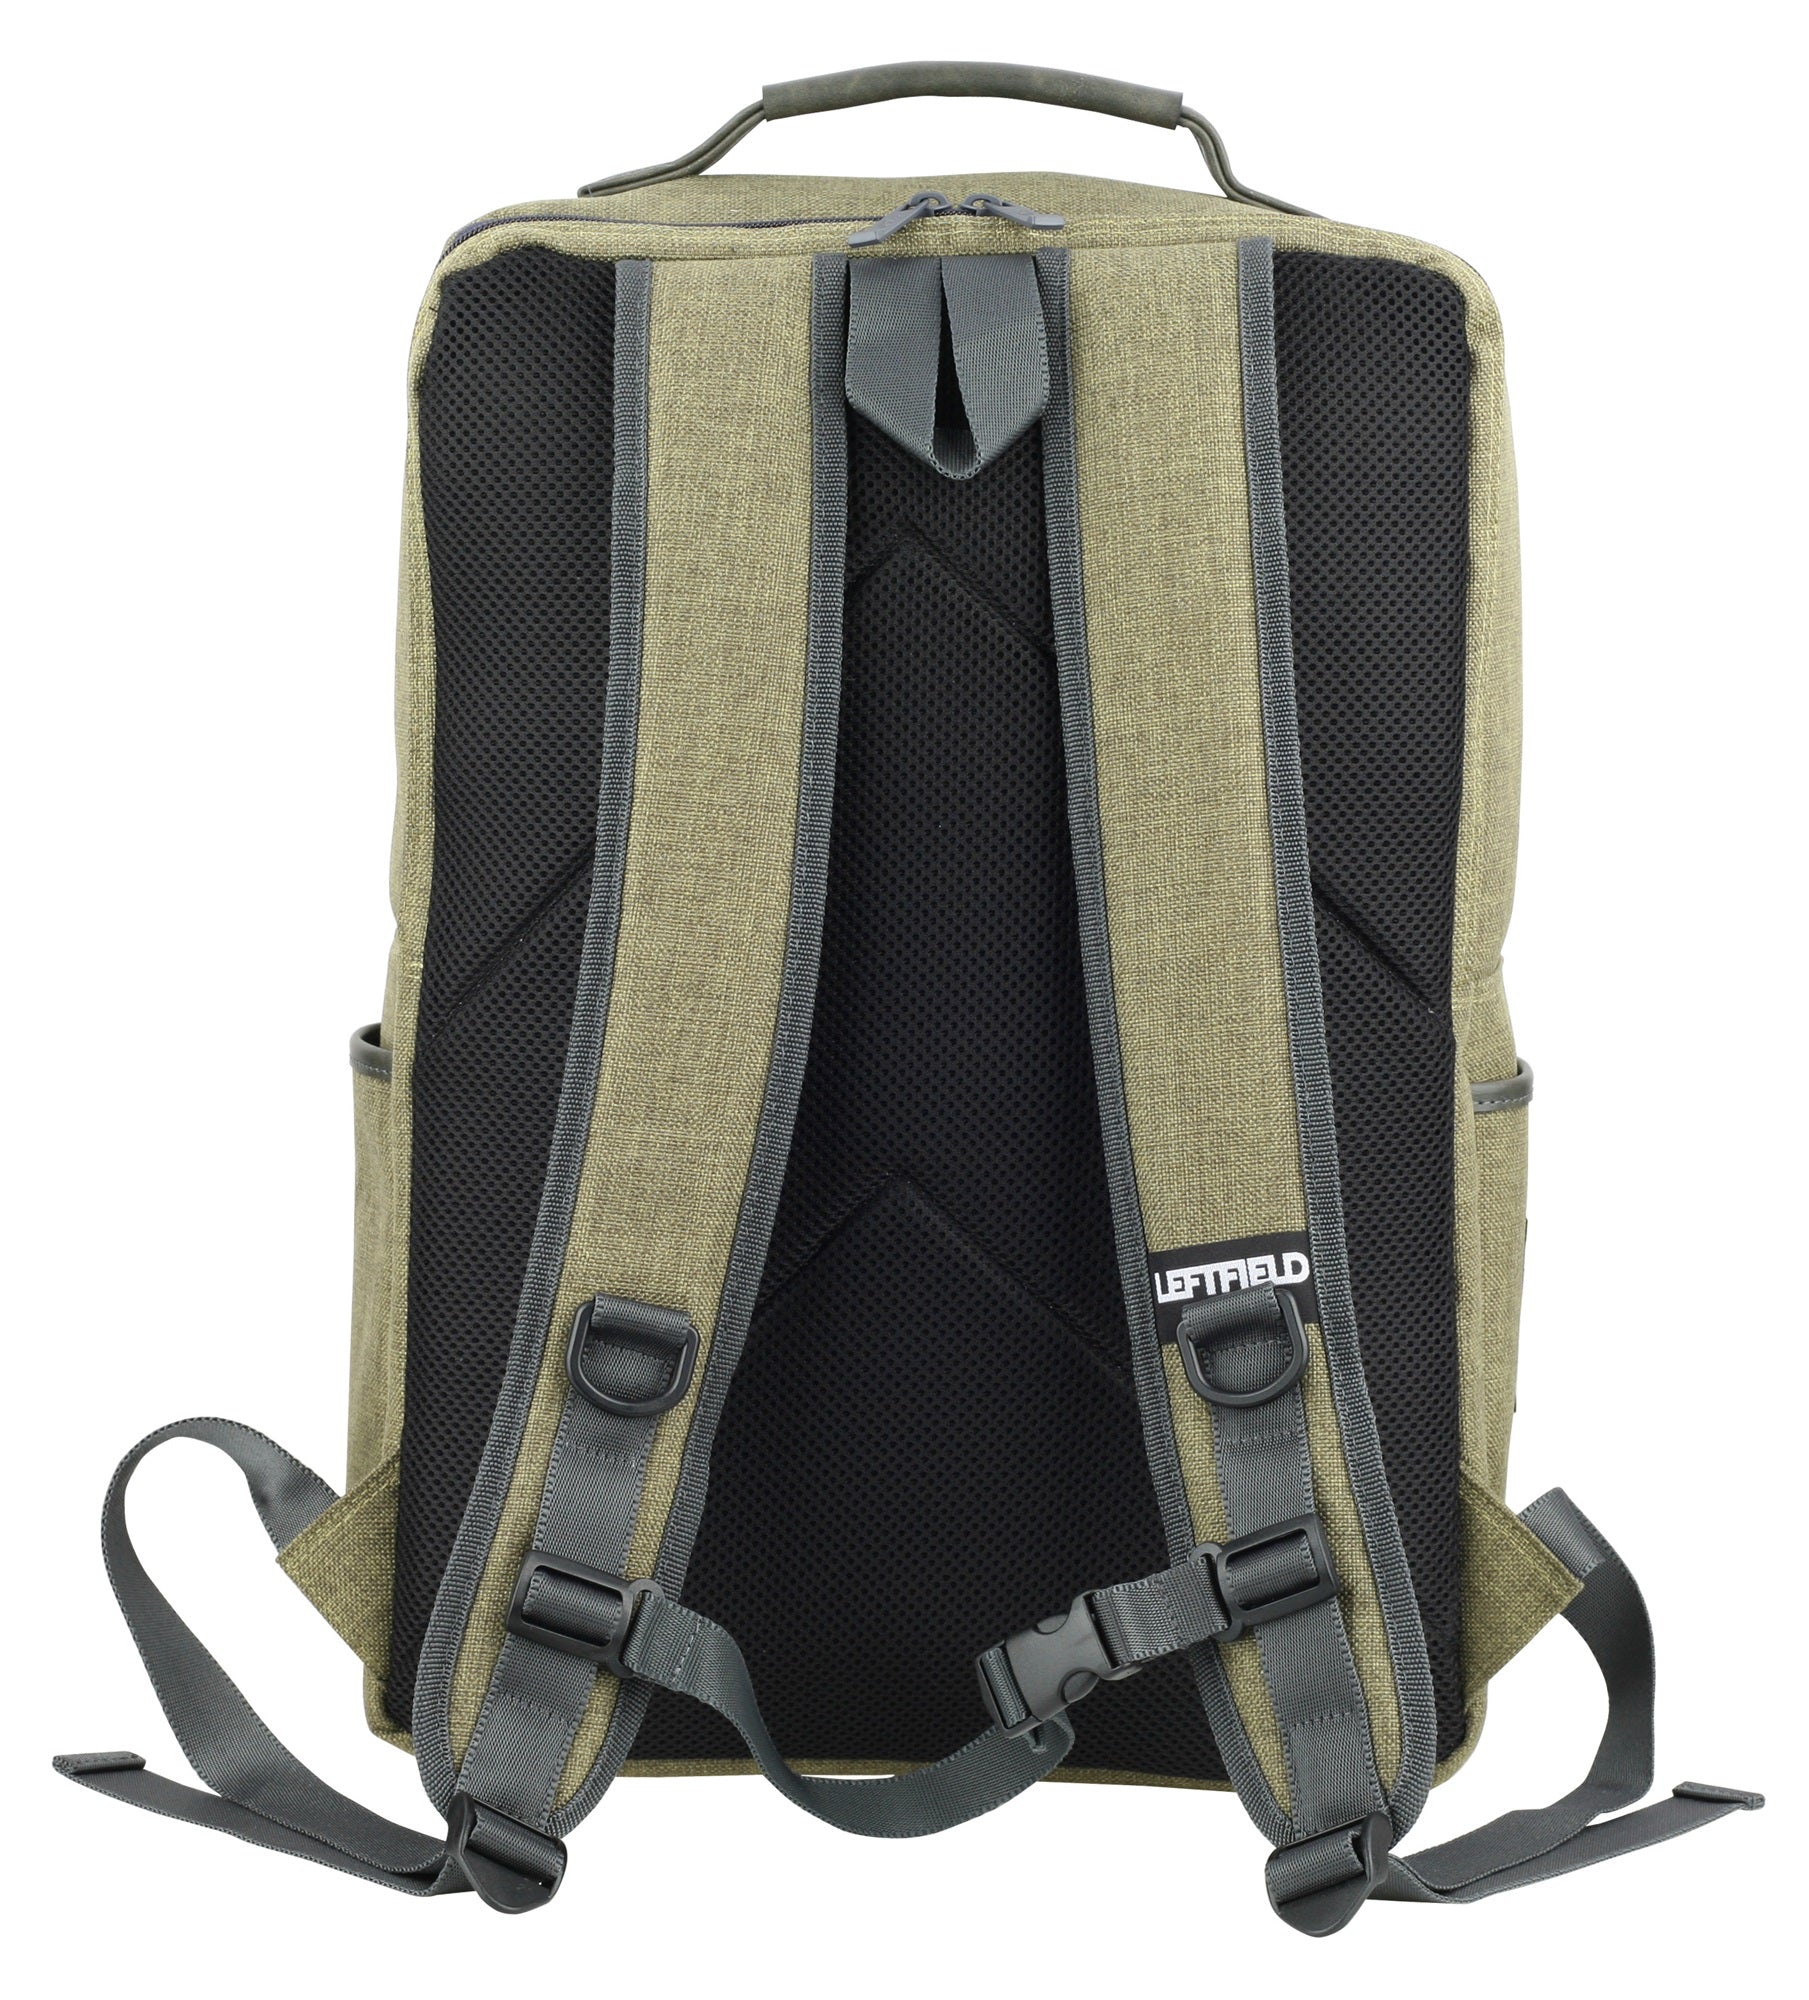 Green Canvas Casual Laptop Daypack School Backpacks